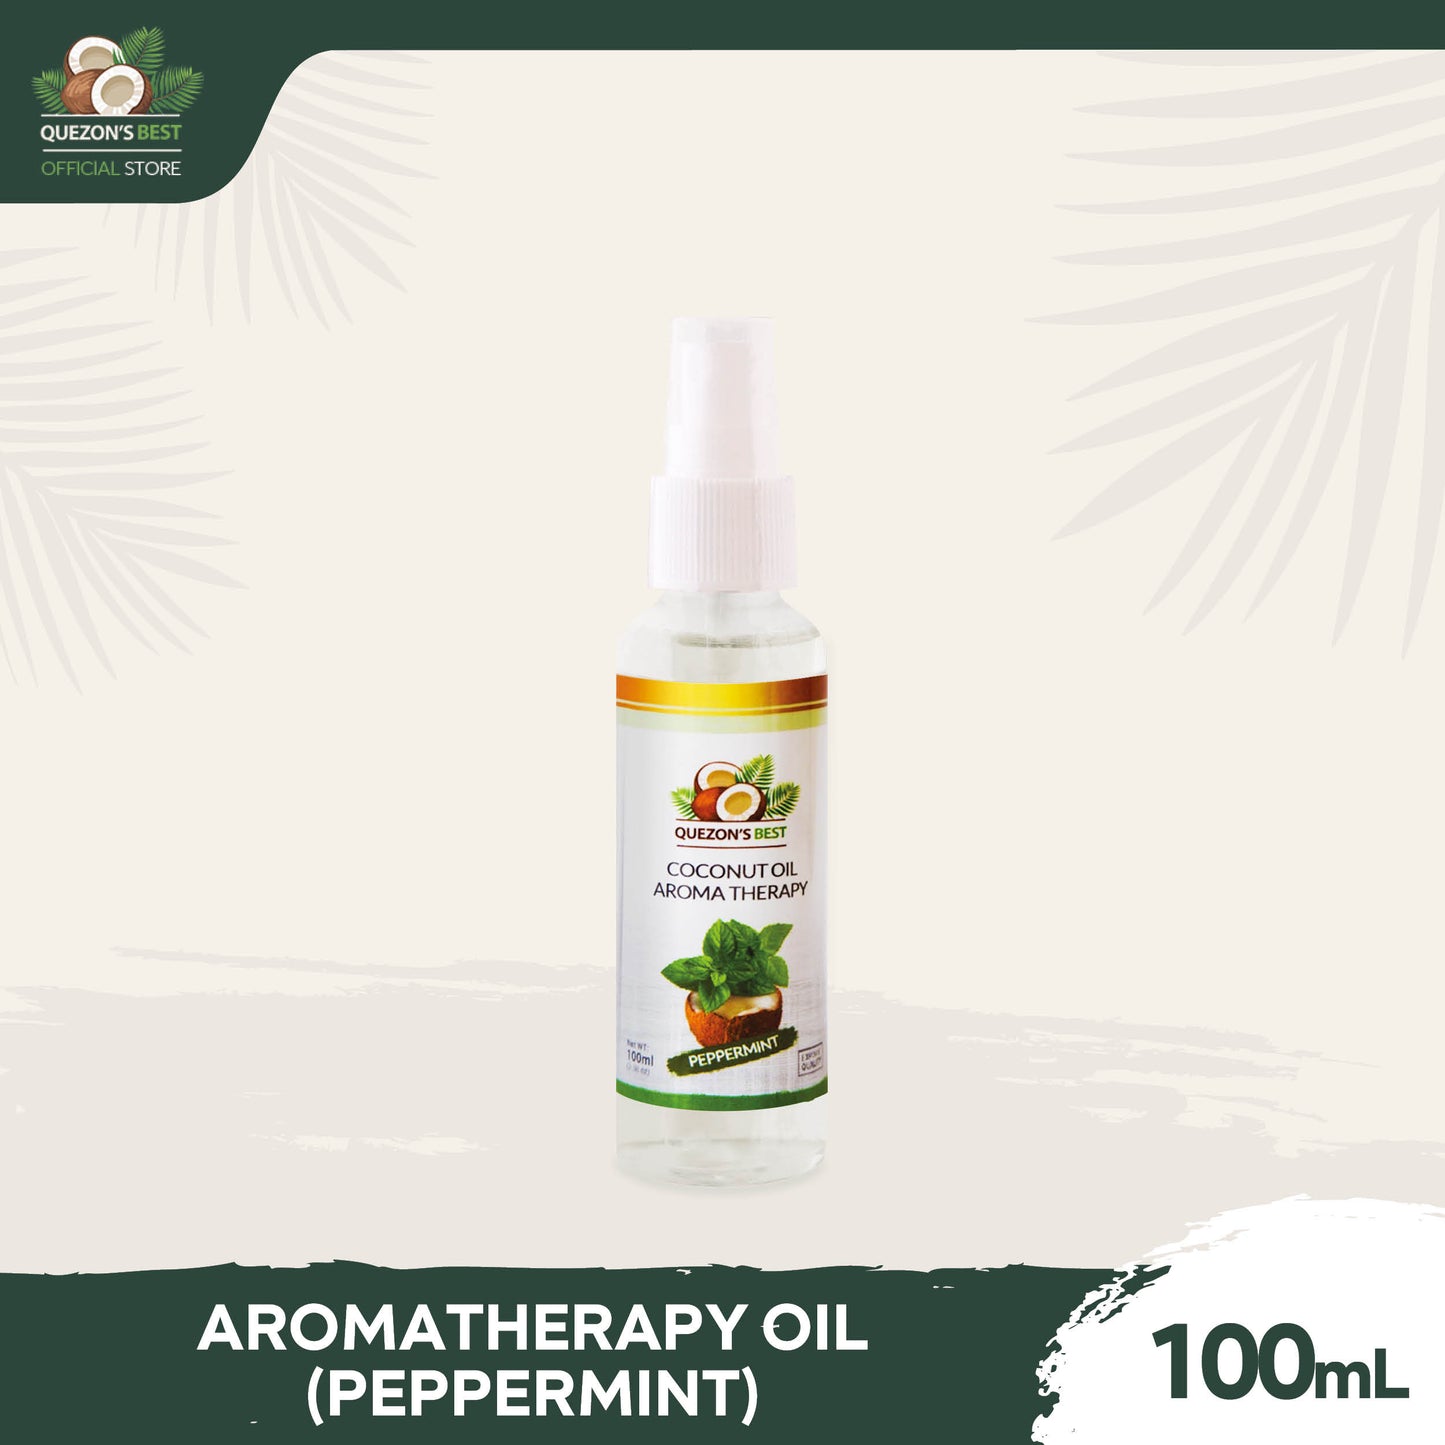 Quezon's Best Aroma Therapy Coconut Oil - Peppermint 100mL